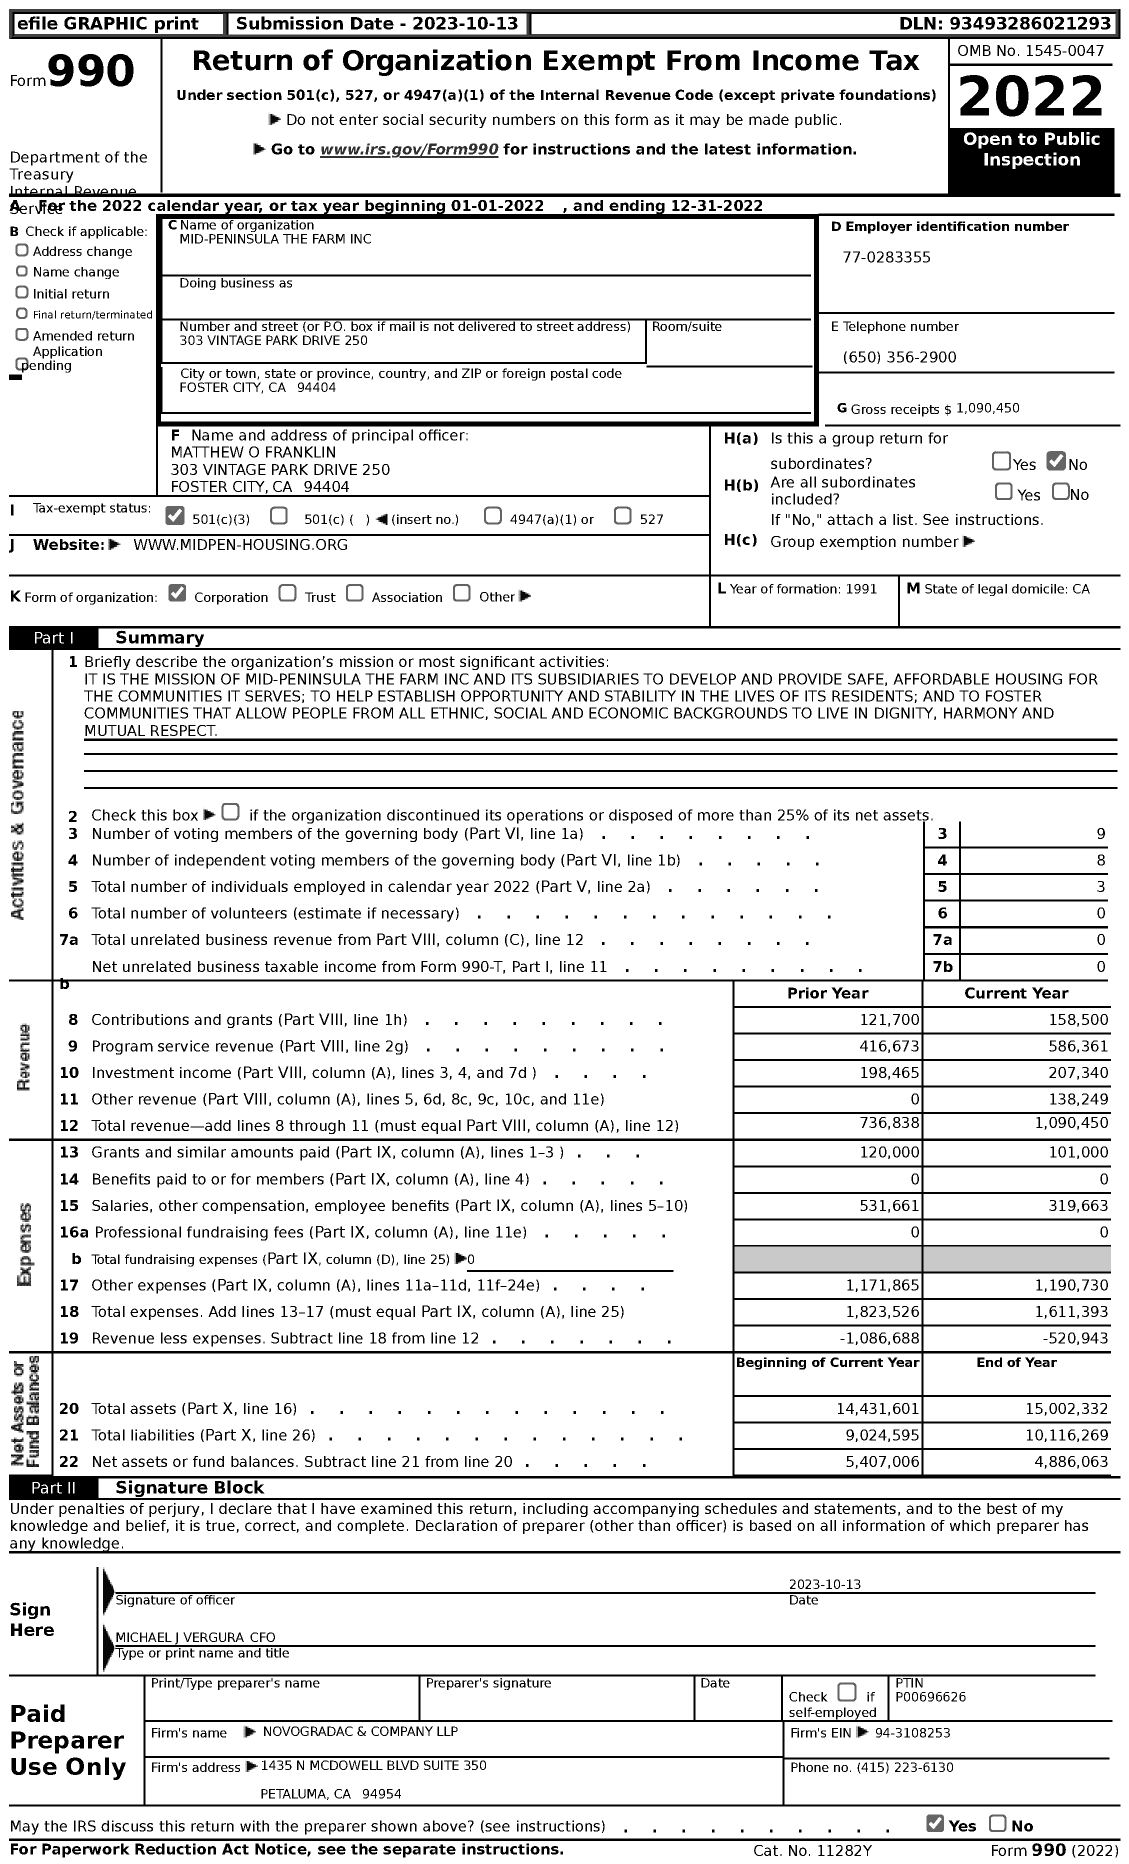 Image of first page of 2022 Form 990 for Mid-Peninsula the Farm